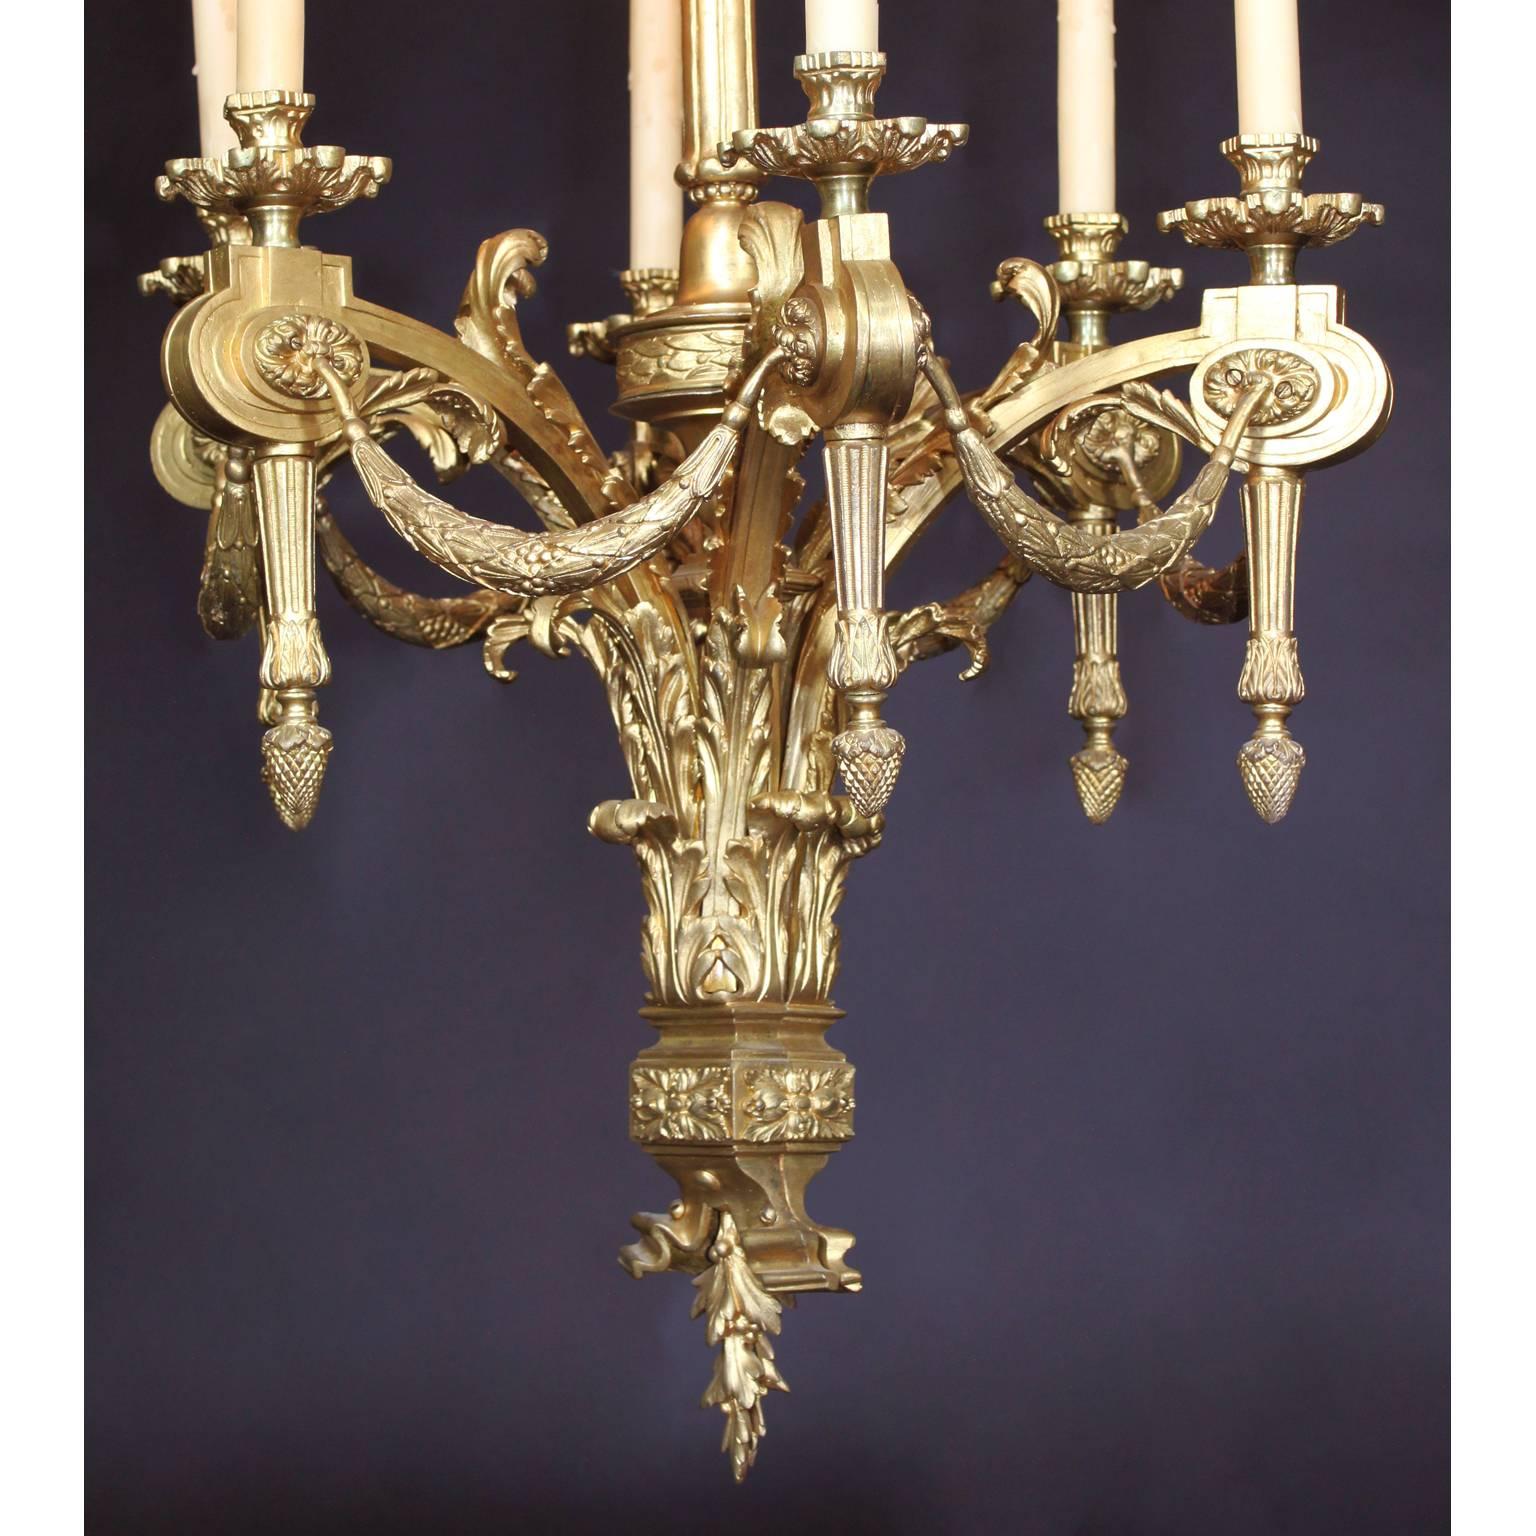 French Louis XV I style gilt bronze six-light chandelier. Each candle arm conjoined with garlands above a cartouche ending with an acorn. The center stem with a floral loop all above a foliage and acanthus base, circa 1900's, Paris.
Measures:
Height